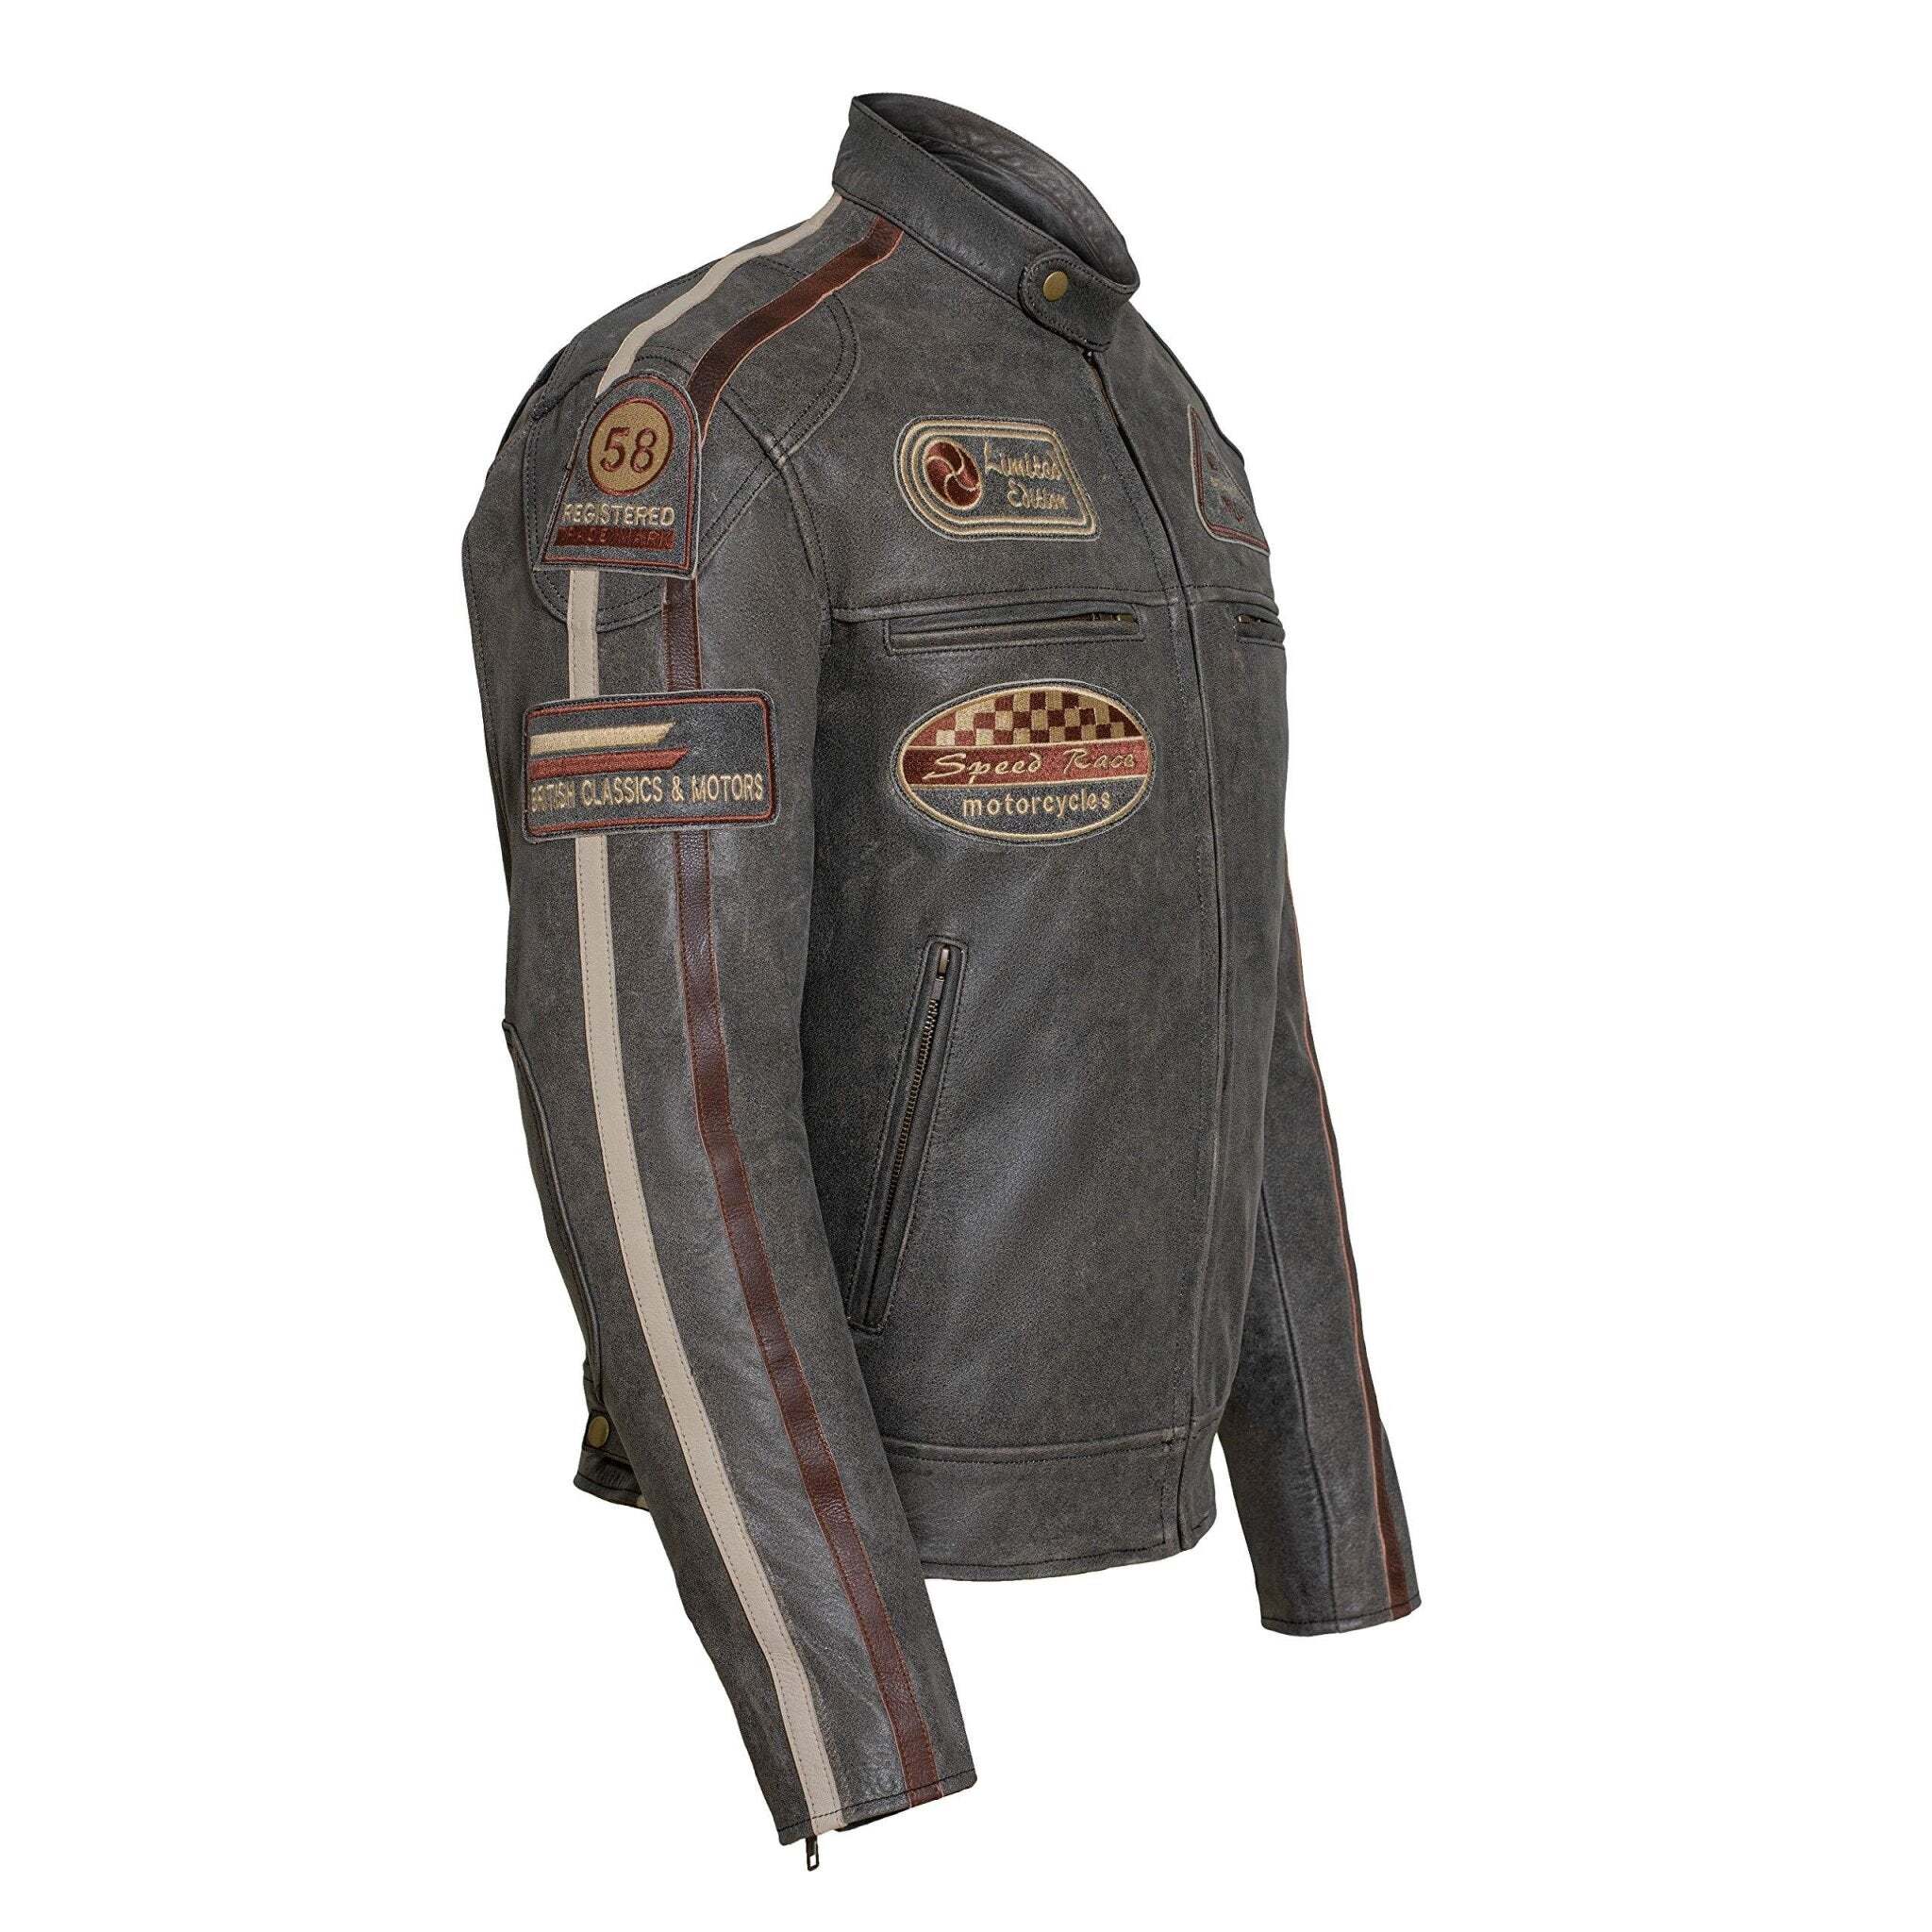 Classic Mens British Striped Biker Leather Jacket with Badges Motorcycle